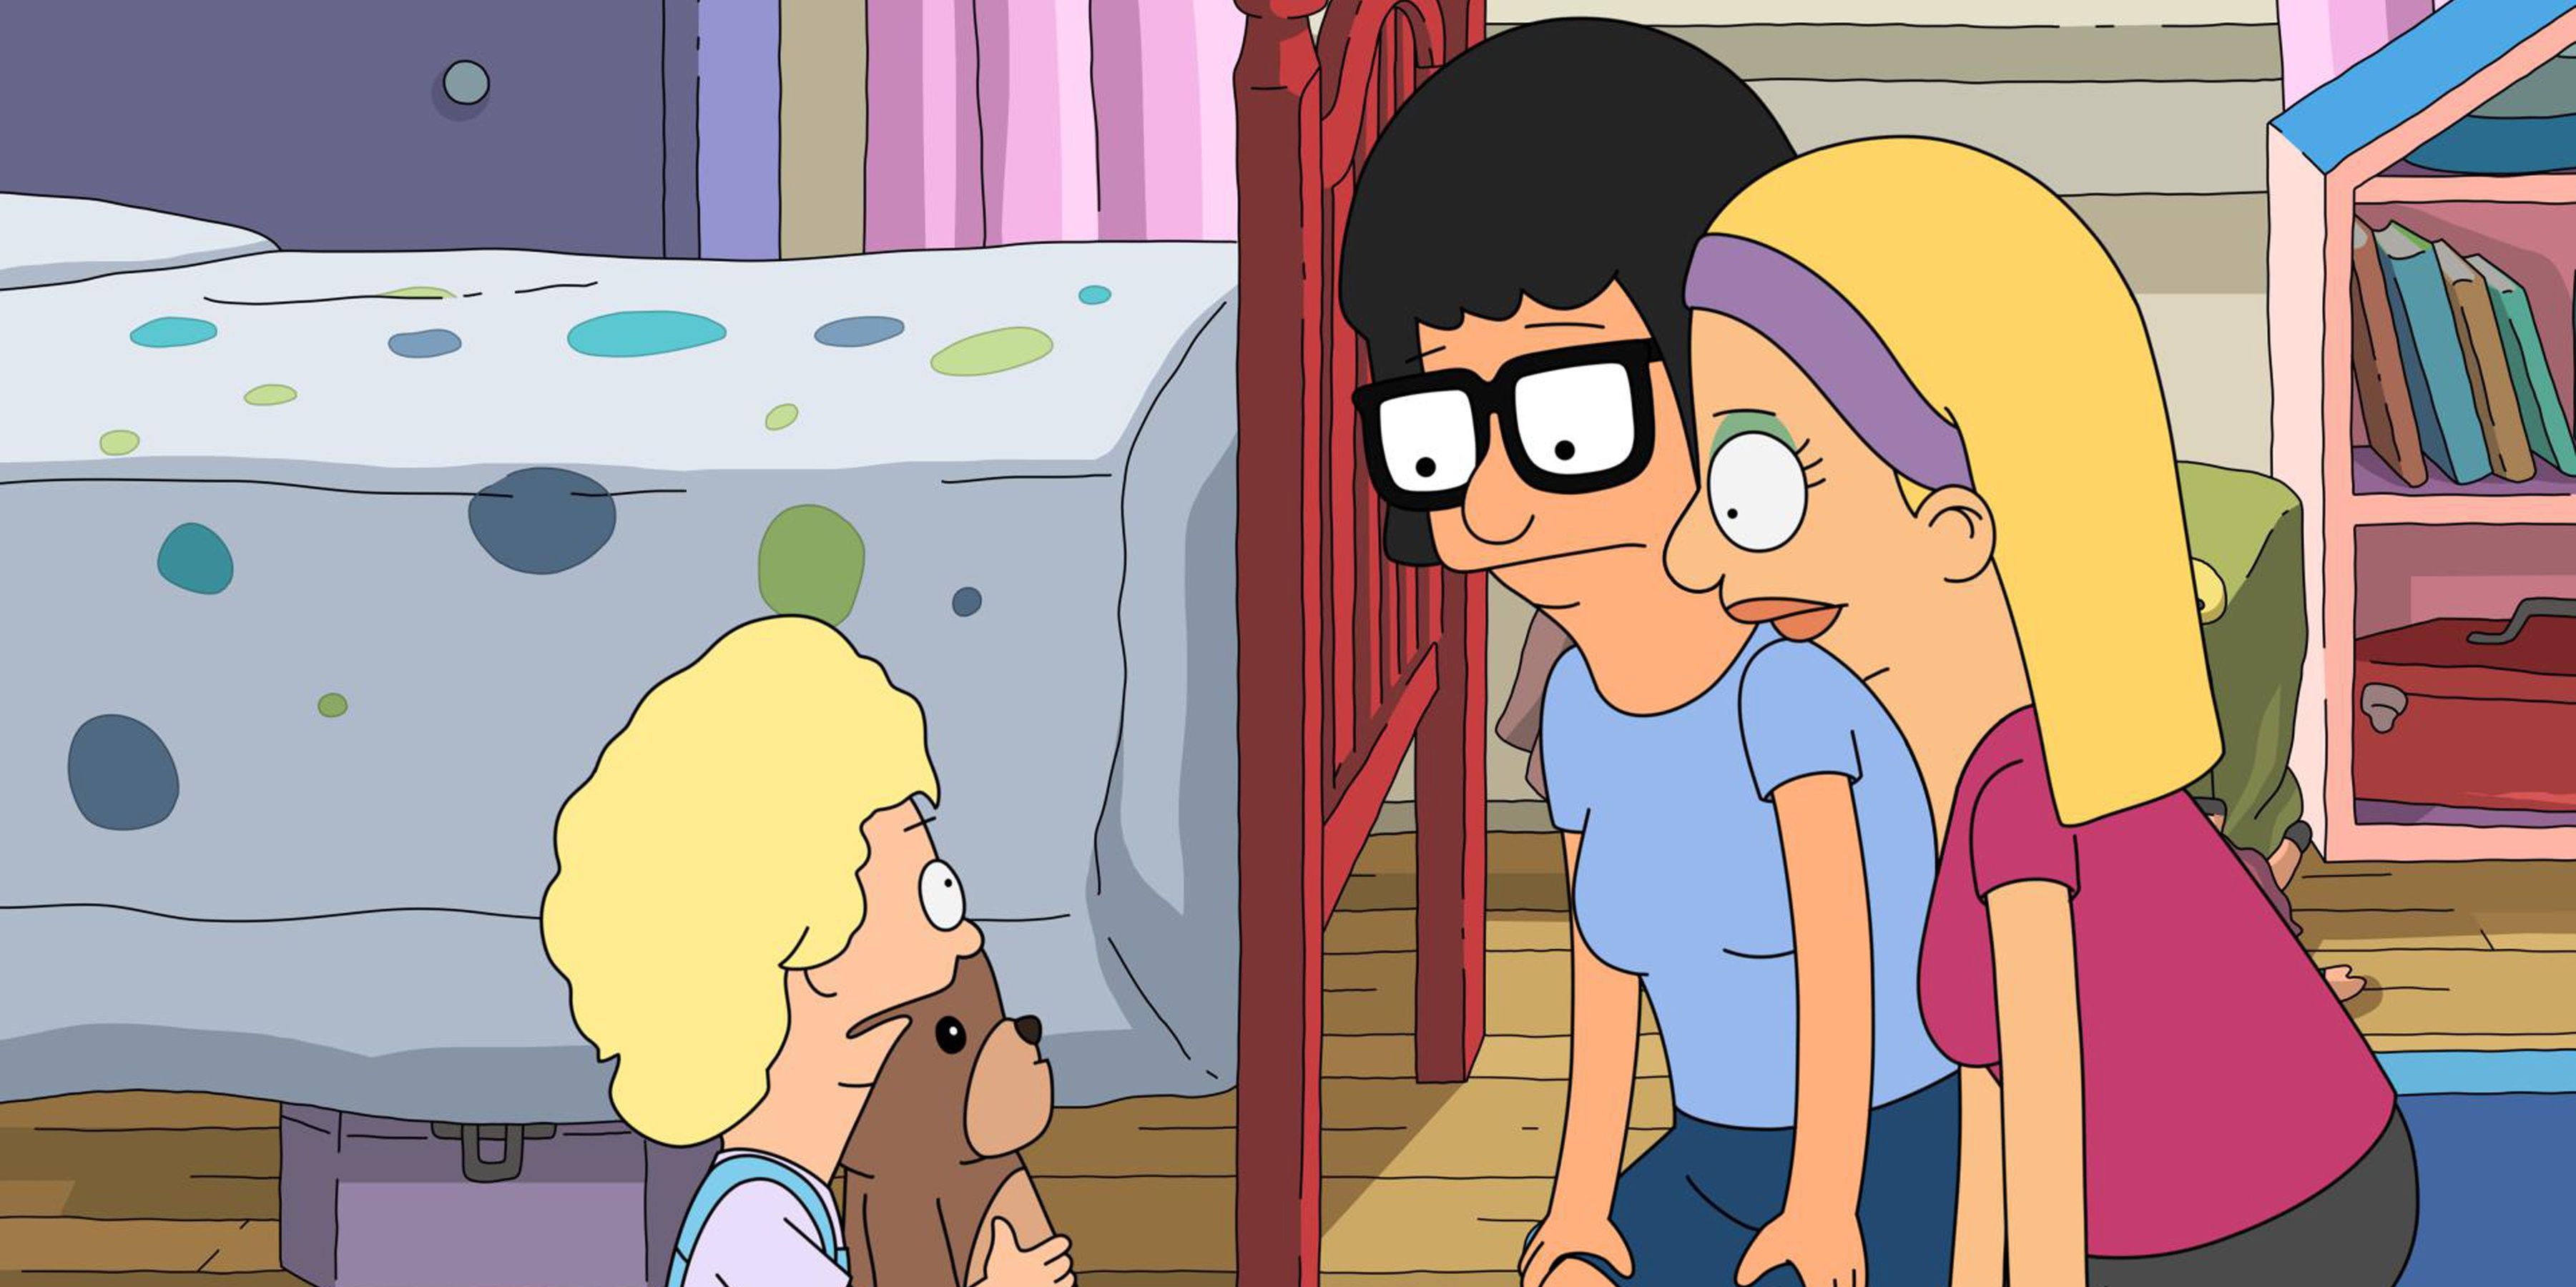 Bobs Burgers 10 Scariest NonHalloween Episodes Ranked